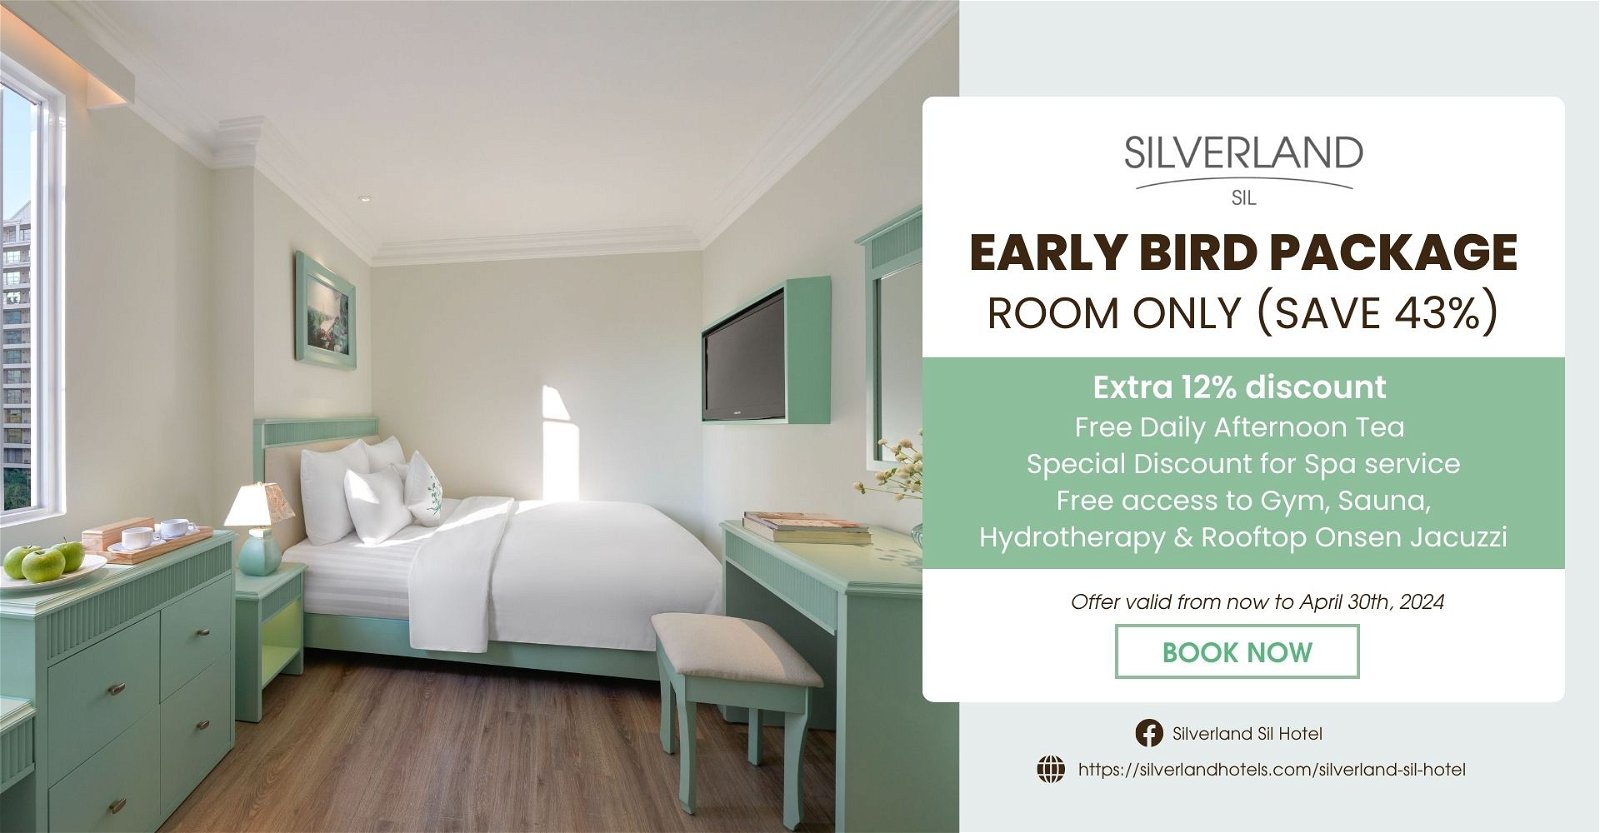 SILVERLAND SIL – EARLY BIRD – ROOM ONLY (SAVE 43%)